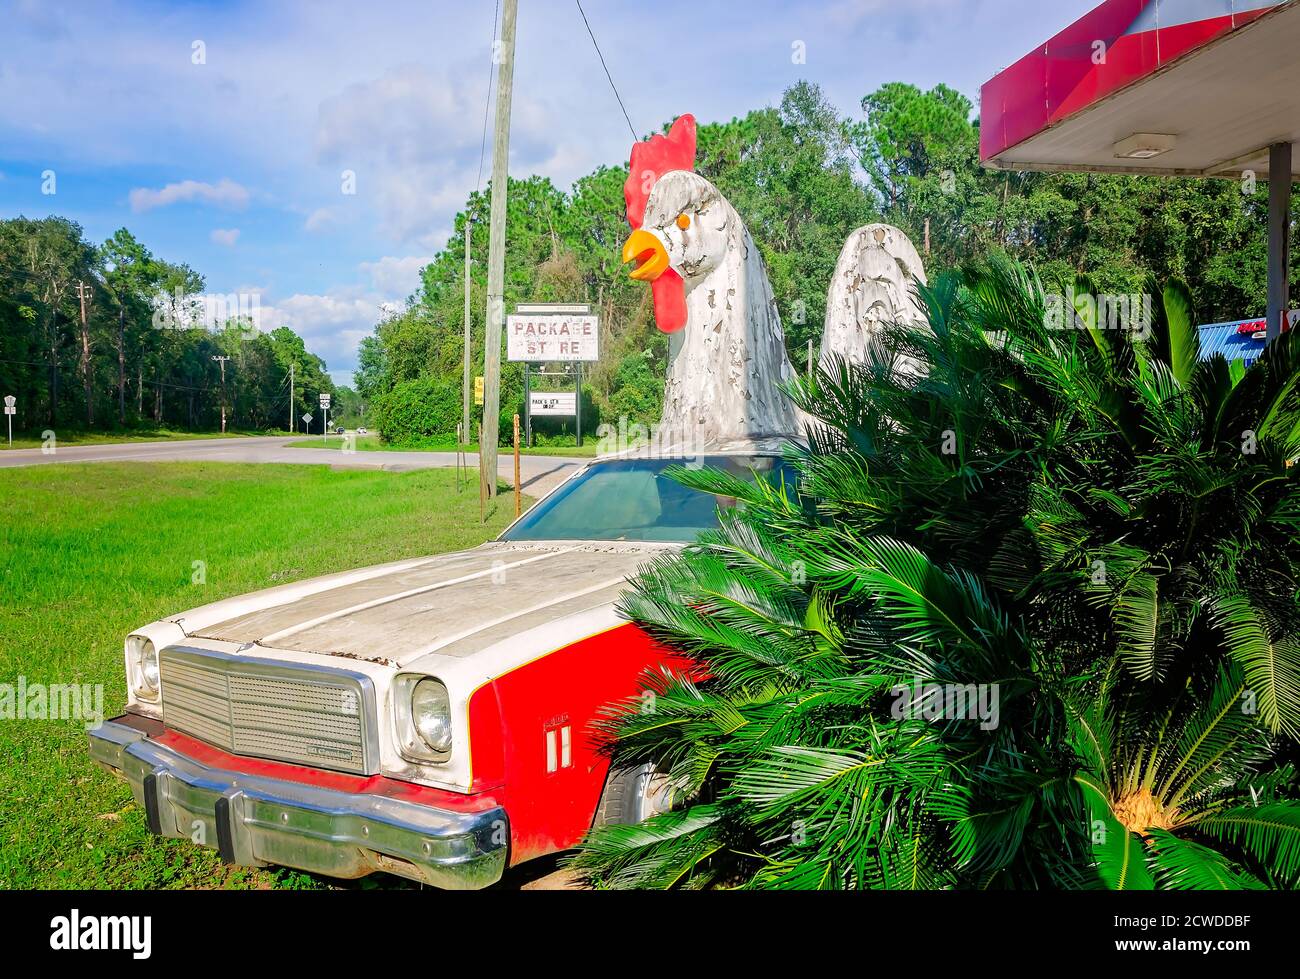 A giant chicken sits atop a 1977 El Camino in front of a Citgo gas station, Sept. 17, 2020, in Irvington, Alabama. The statues attract attention to th Stock Photo